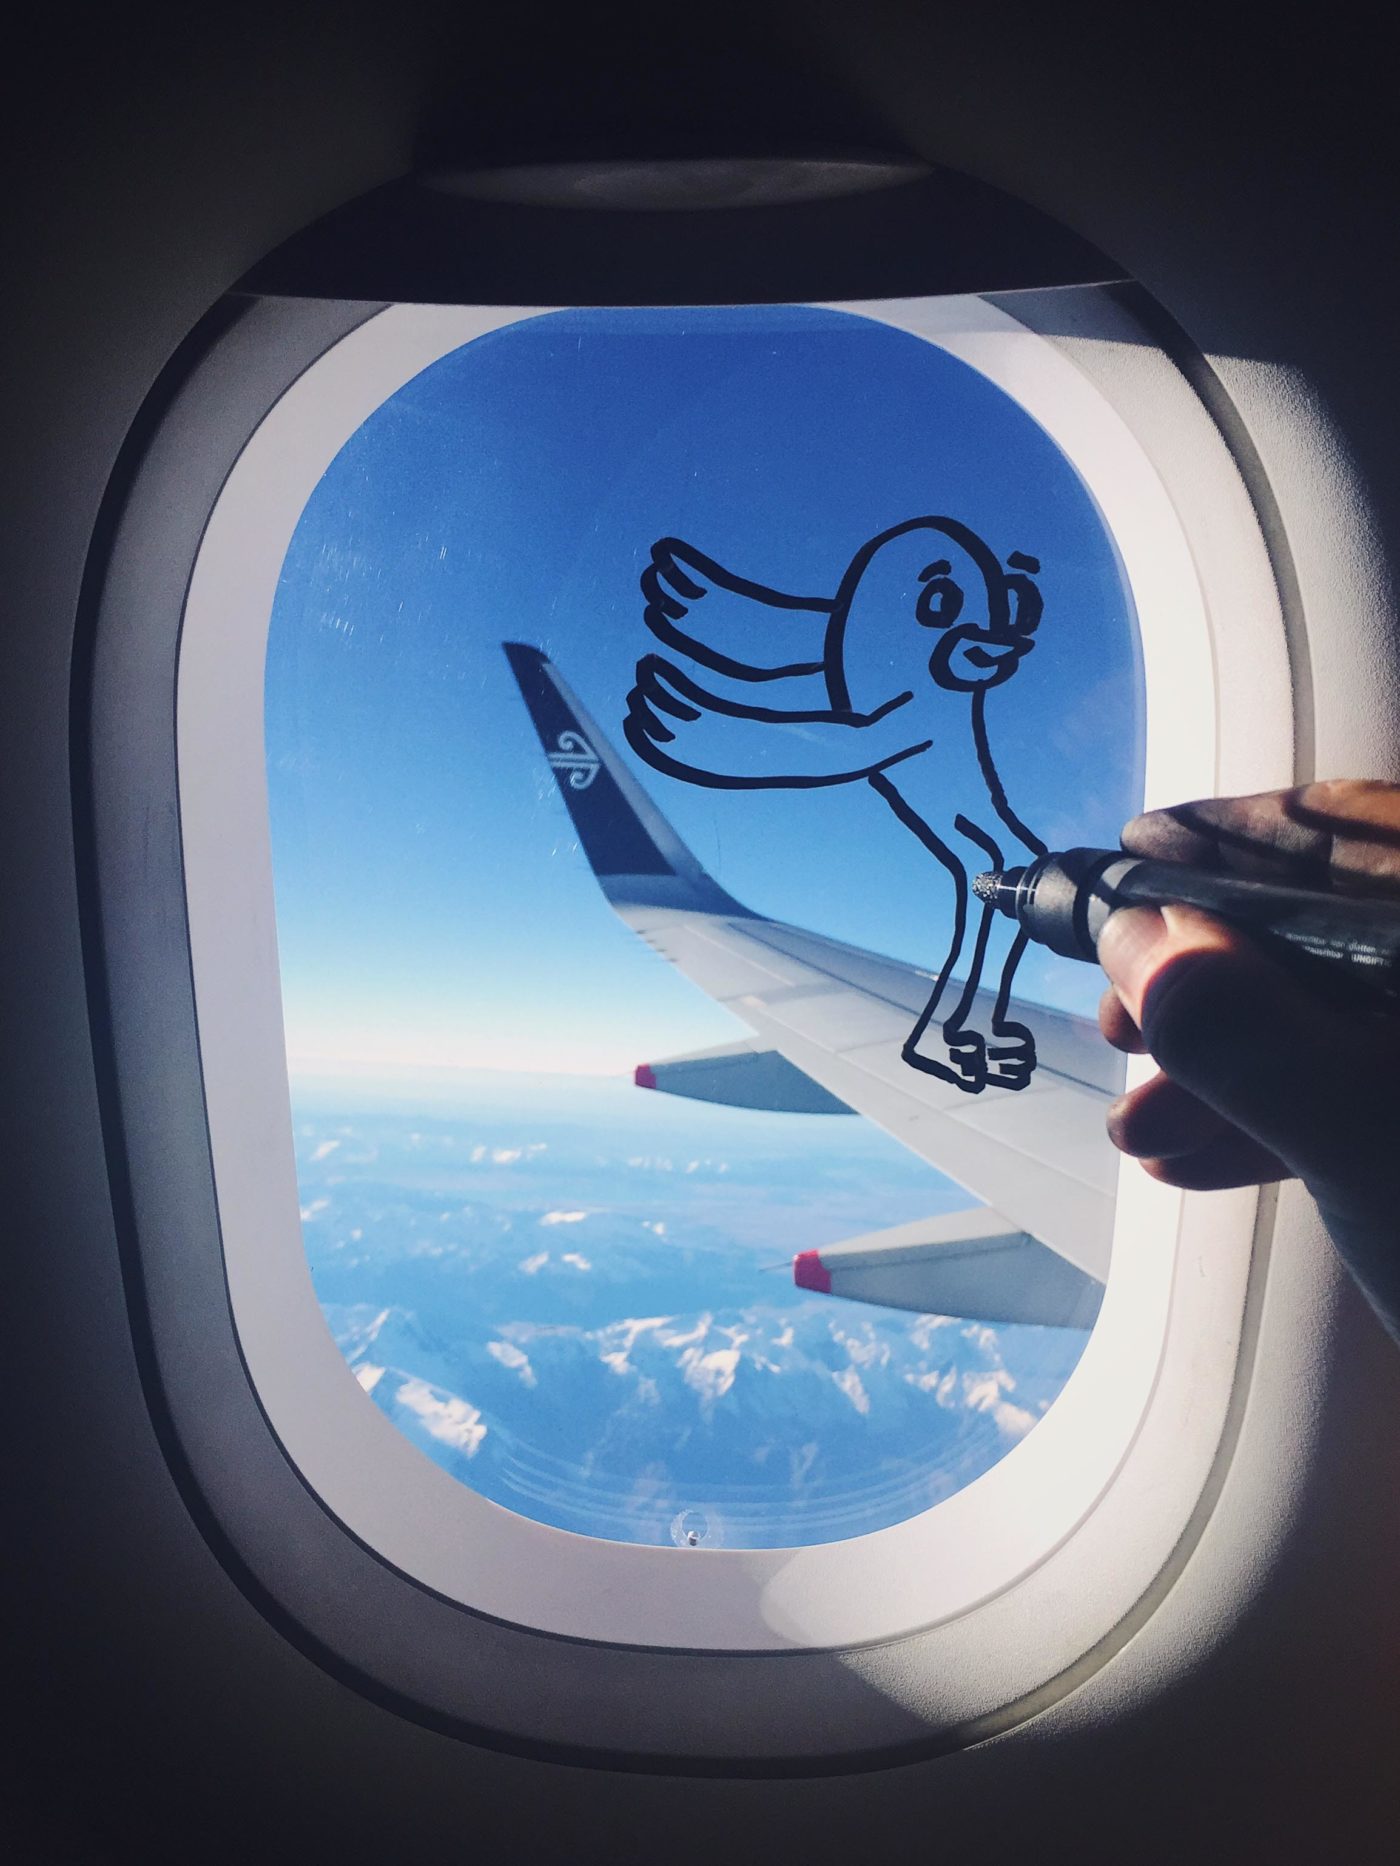 Chalk drawing on aeroplane window, in partnership with Air New Zealand